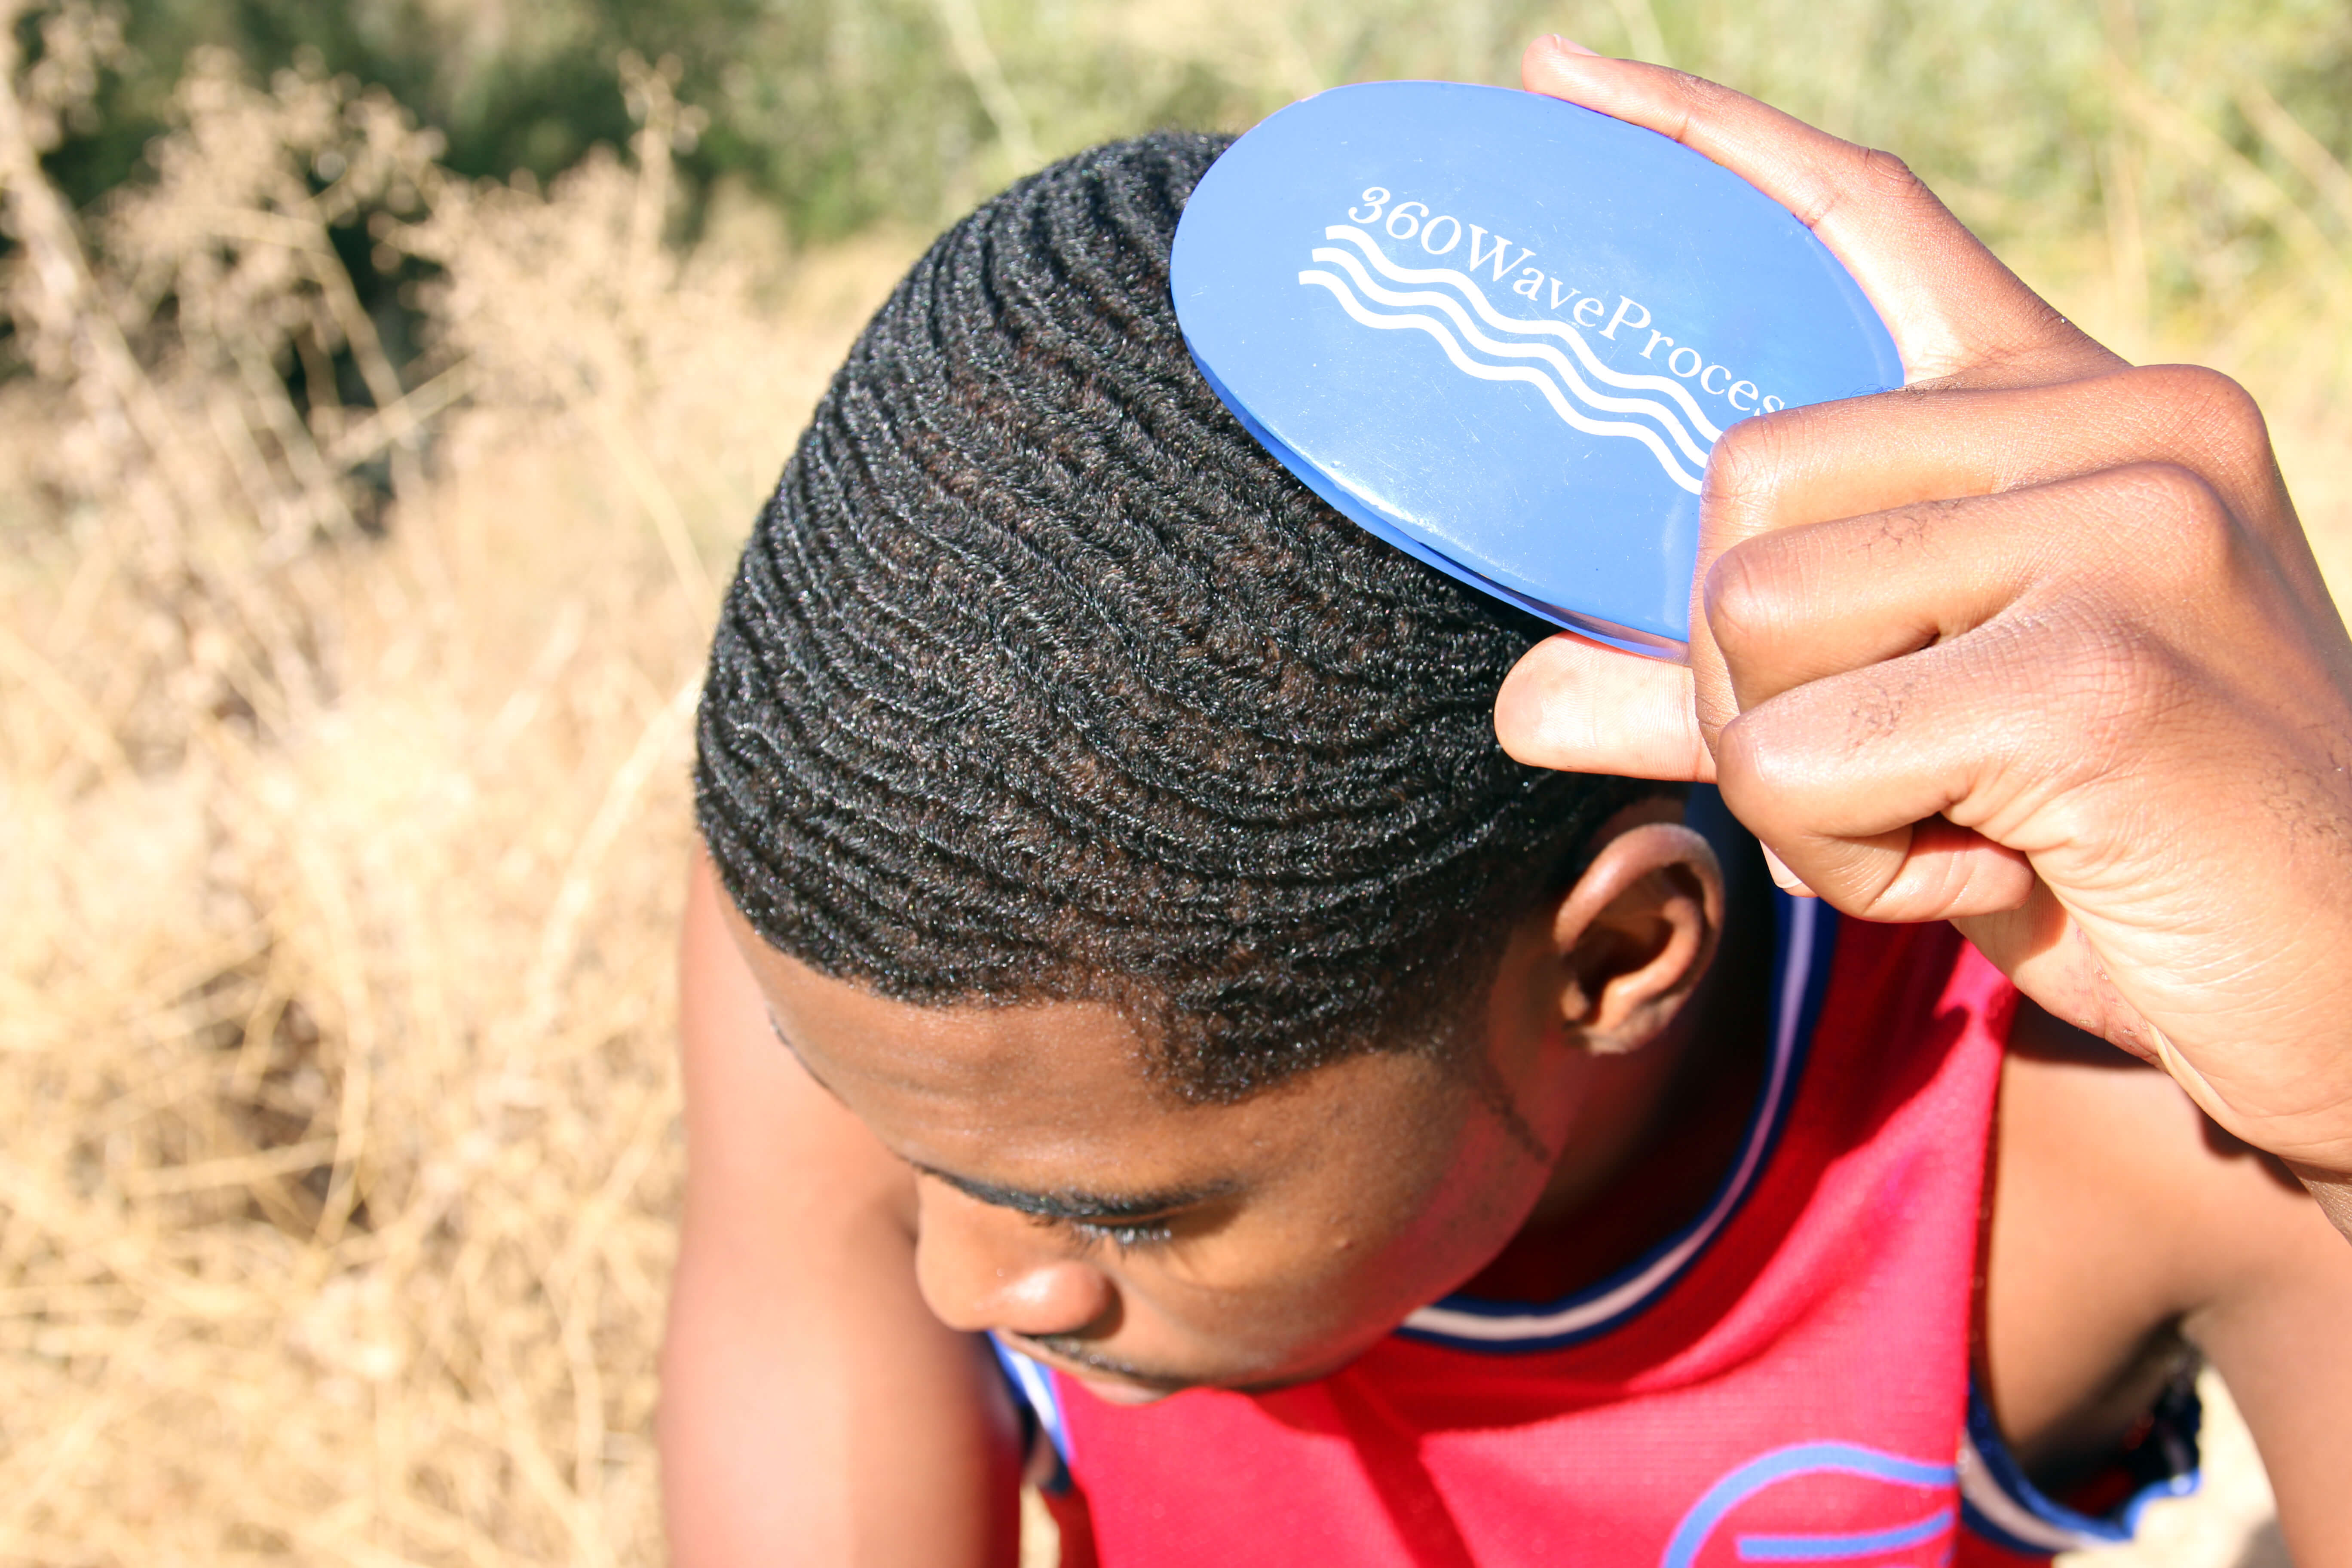 How To Get 360 Waves Without Durag: What You Need (Step 1) 